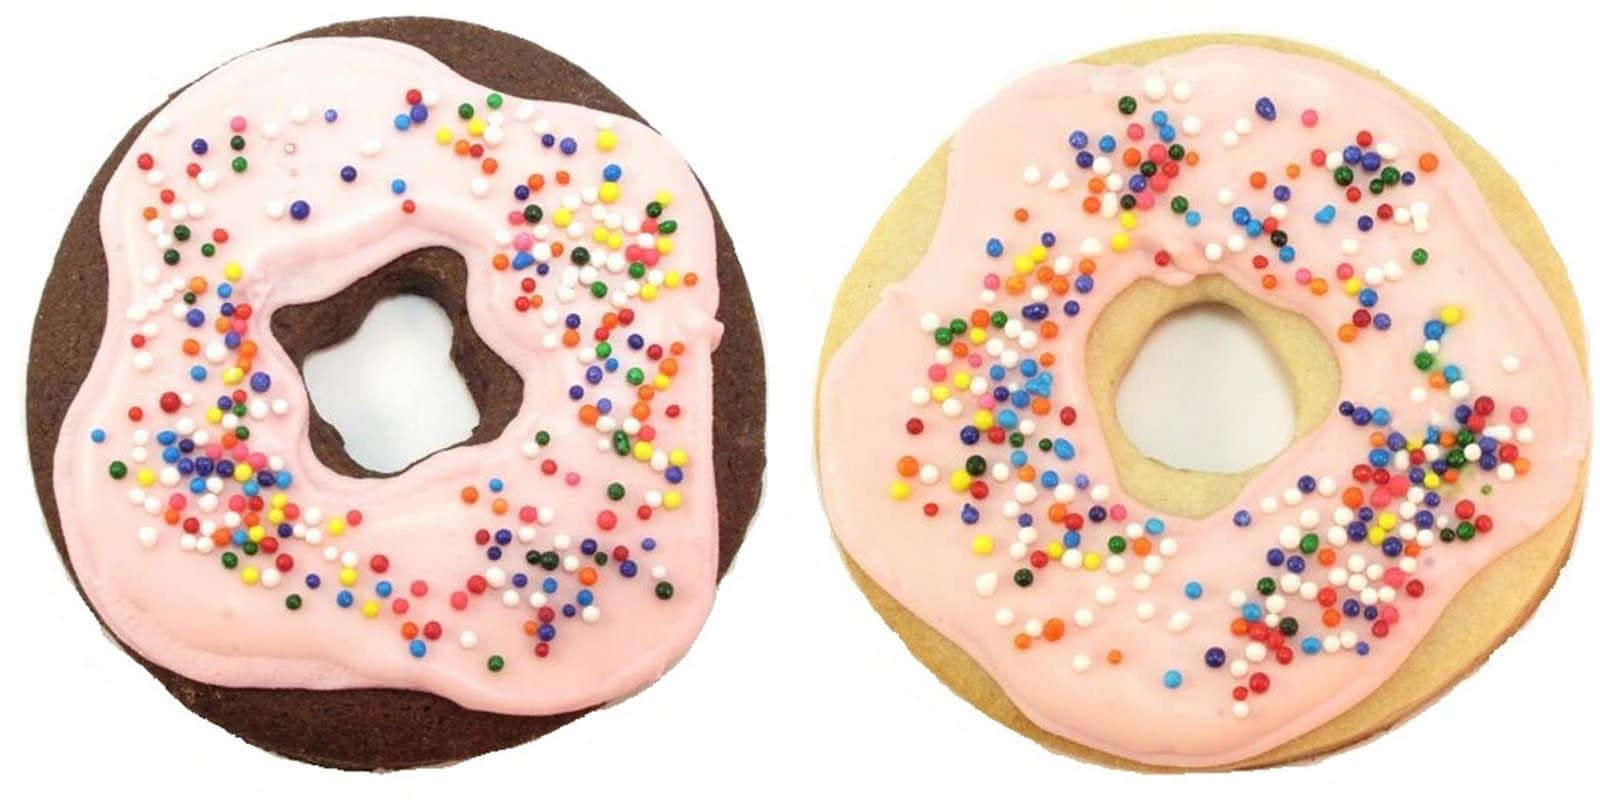 Doughnut cookies: How to decorate cookies to look like donuts